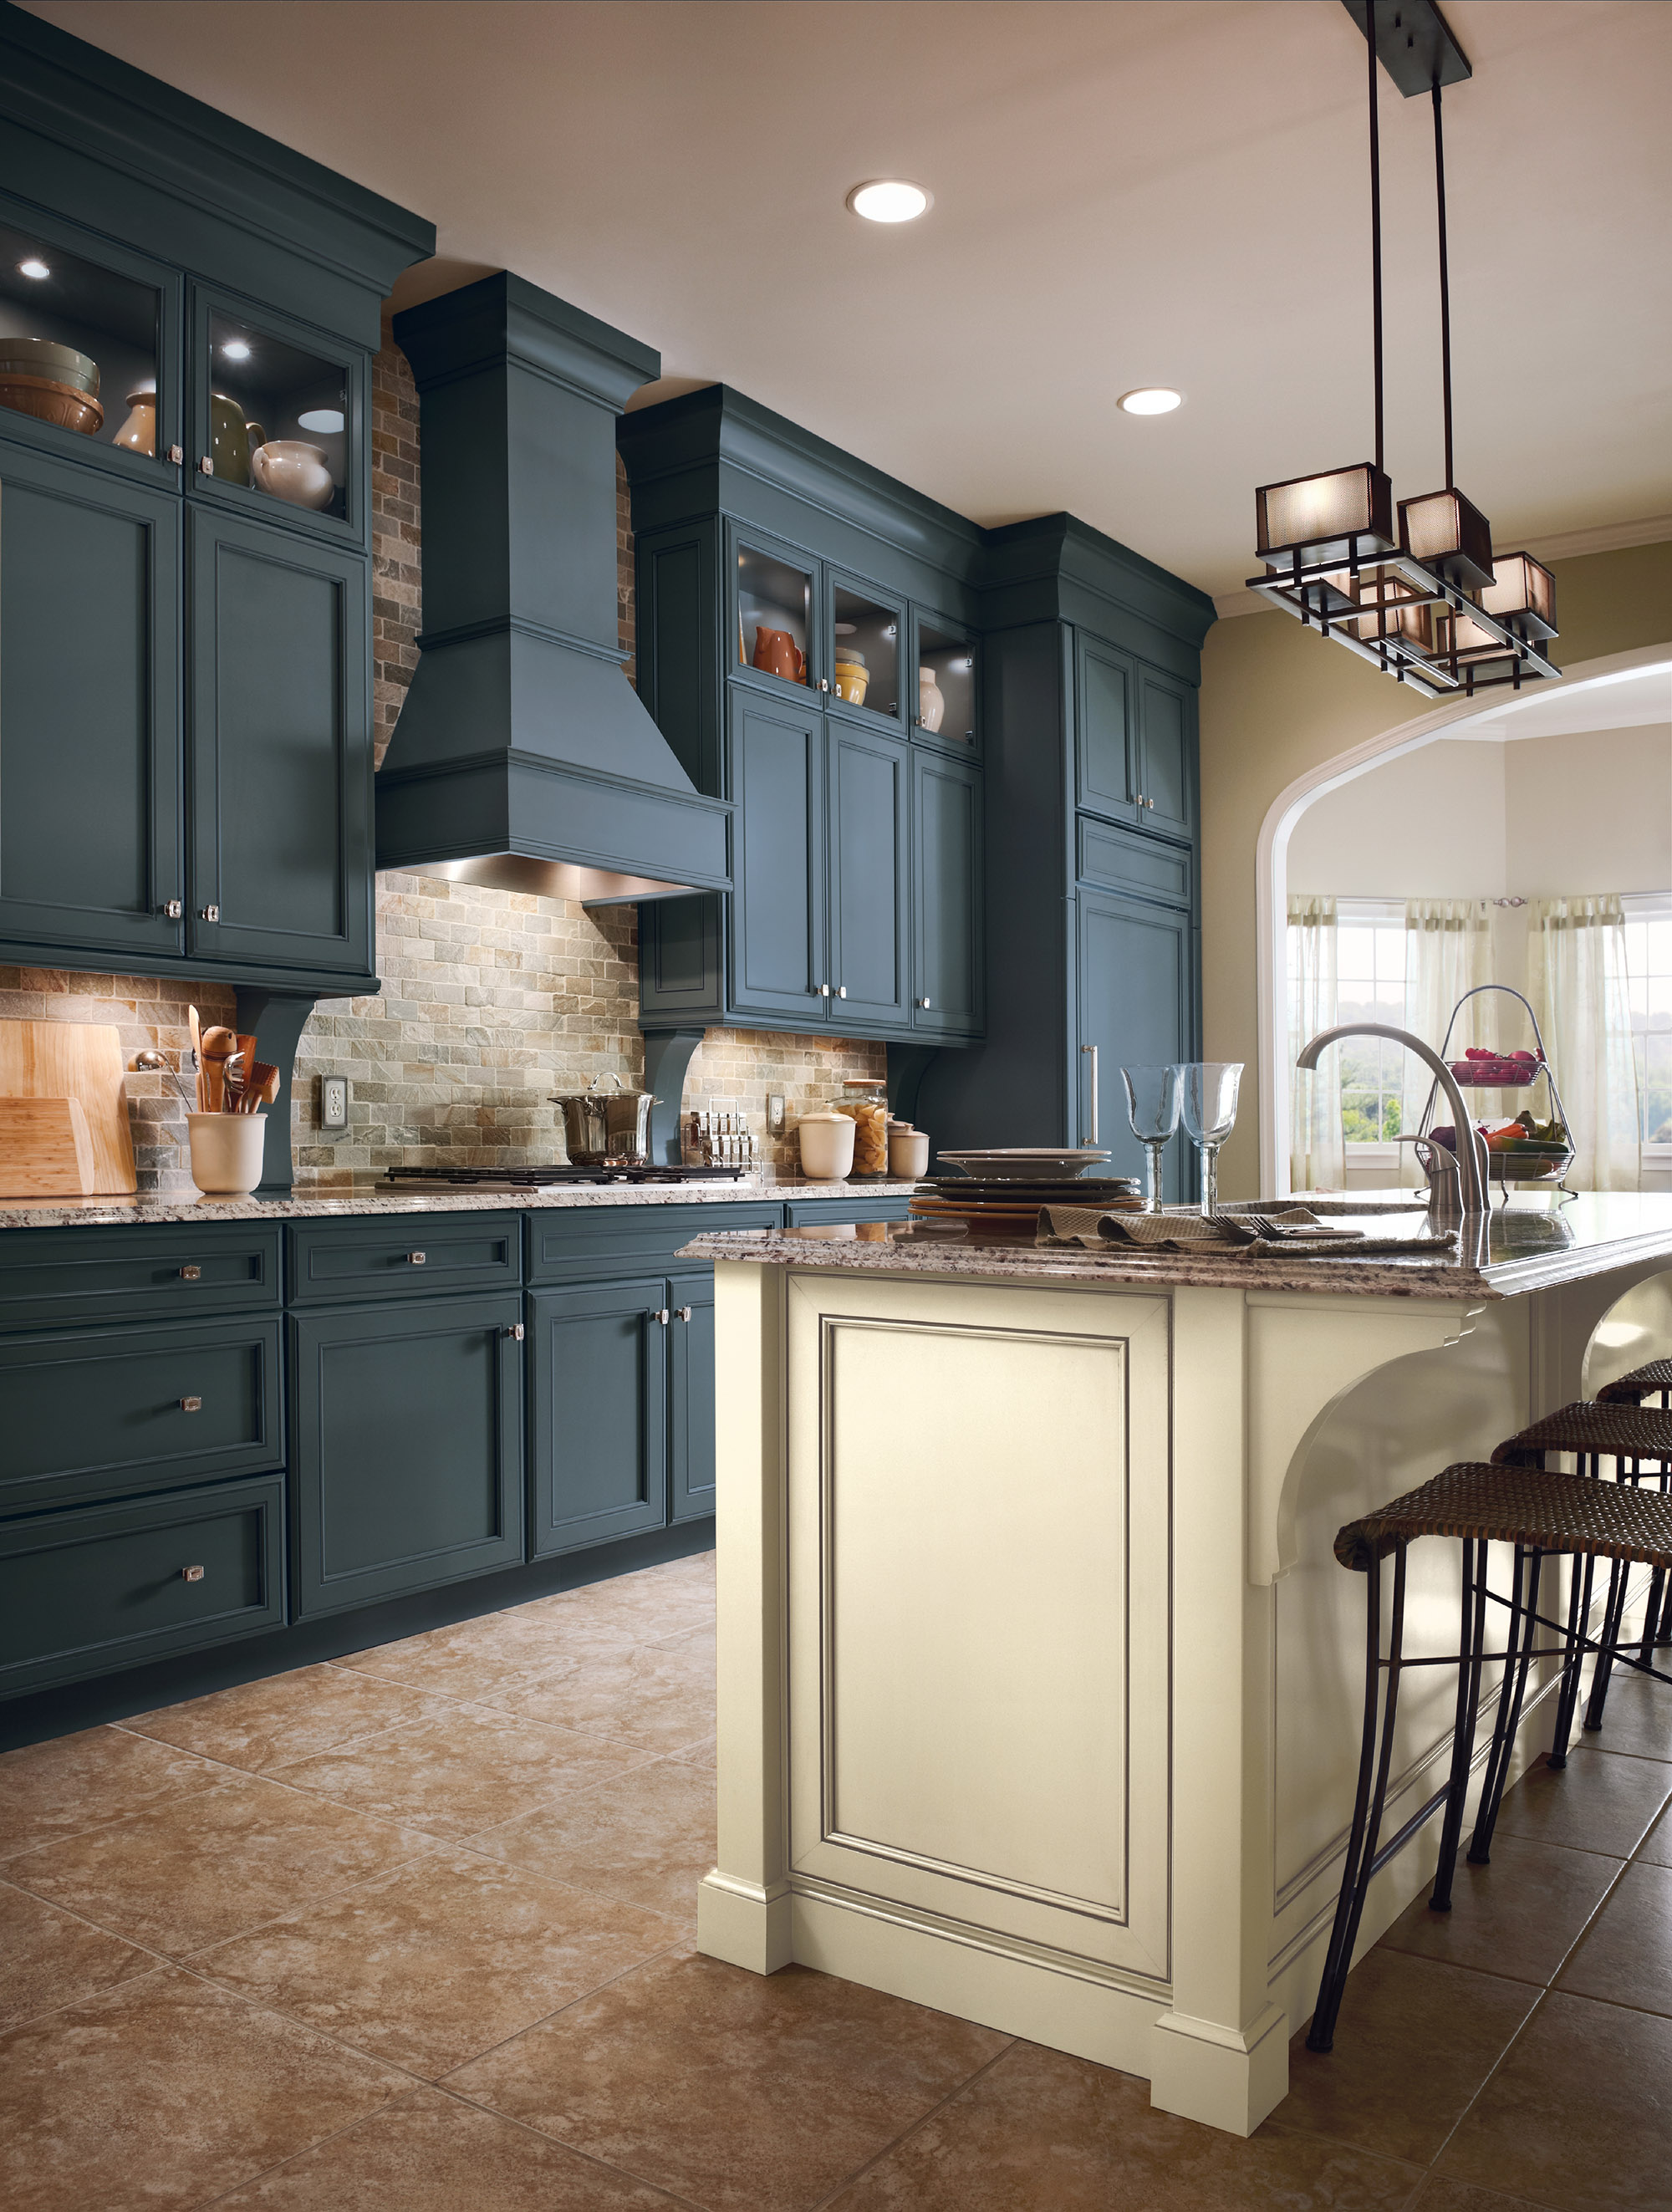 Kraftmaid Kitchen Of The Year, What Should I Use To Clean My Kraftmaid Cabinets